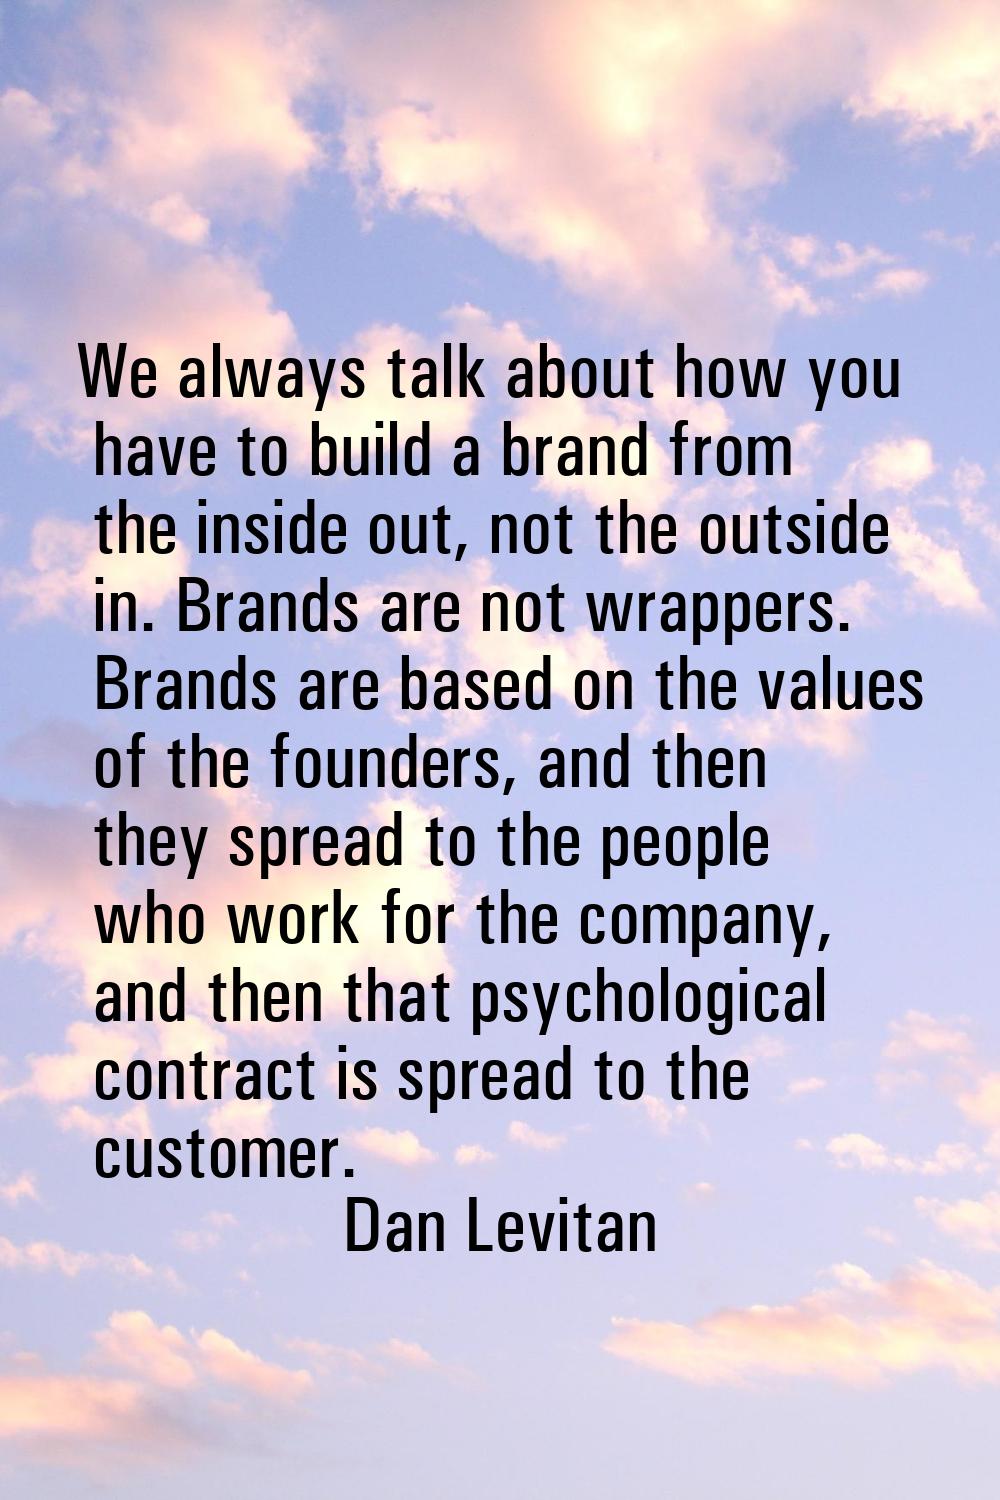 We always talk about how you have to build a brand from the inside out, not the outside in. Brands 